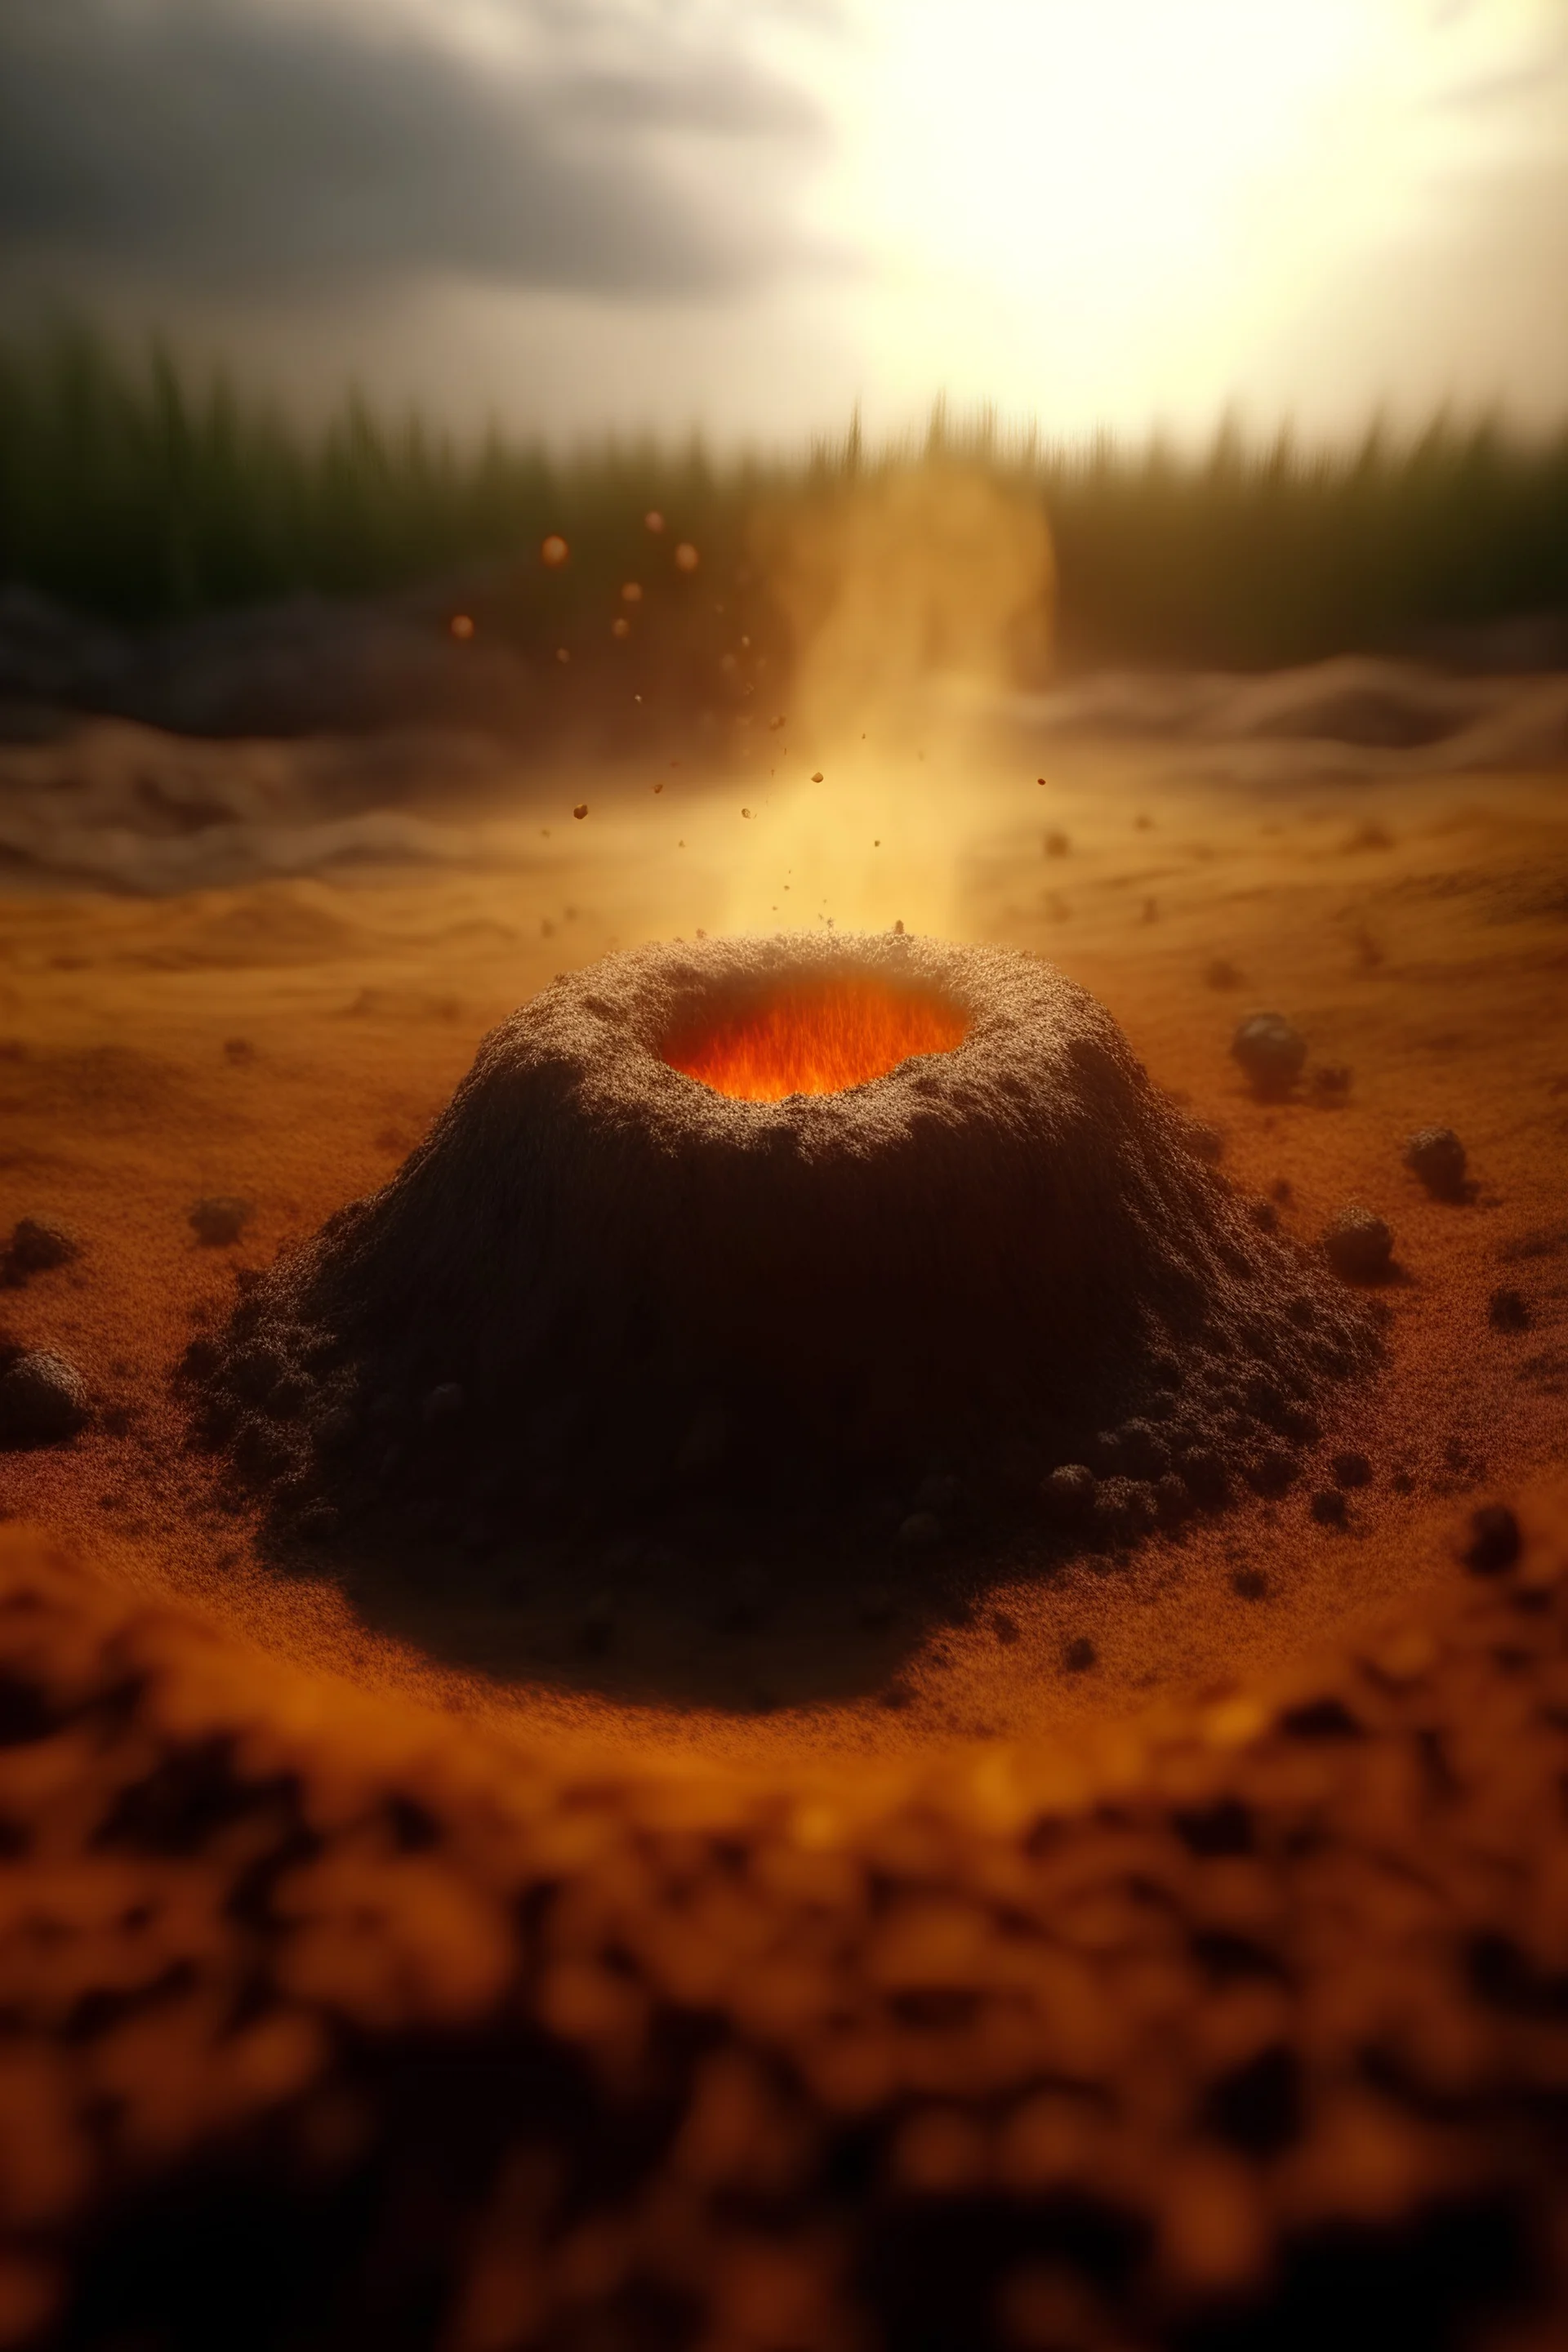 small bright explosion coming up out of a hole in the ground, hd, 4k, hdr, realistic, realism, fujifilm, hd, 4k, realism, hyper real, hdr, fujifilm, leica, high definition, real